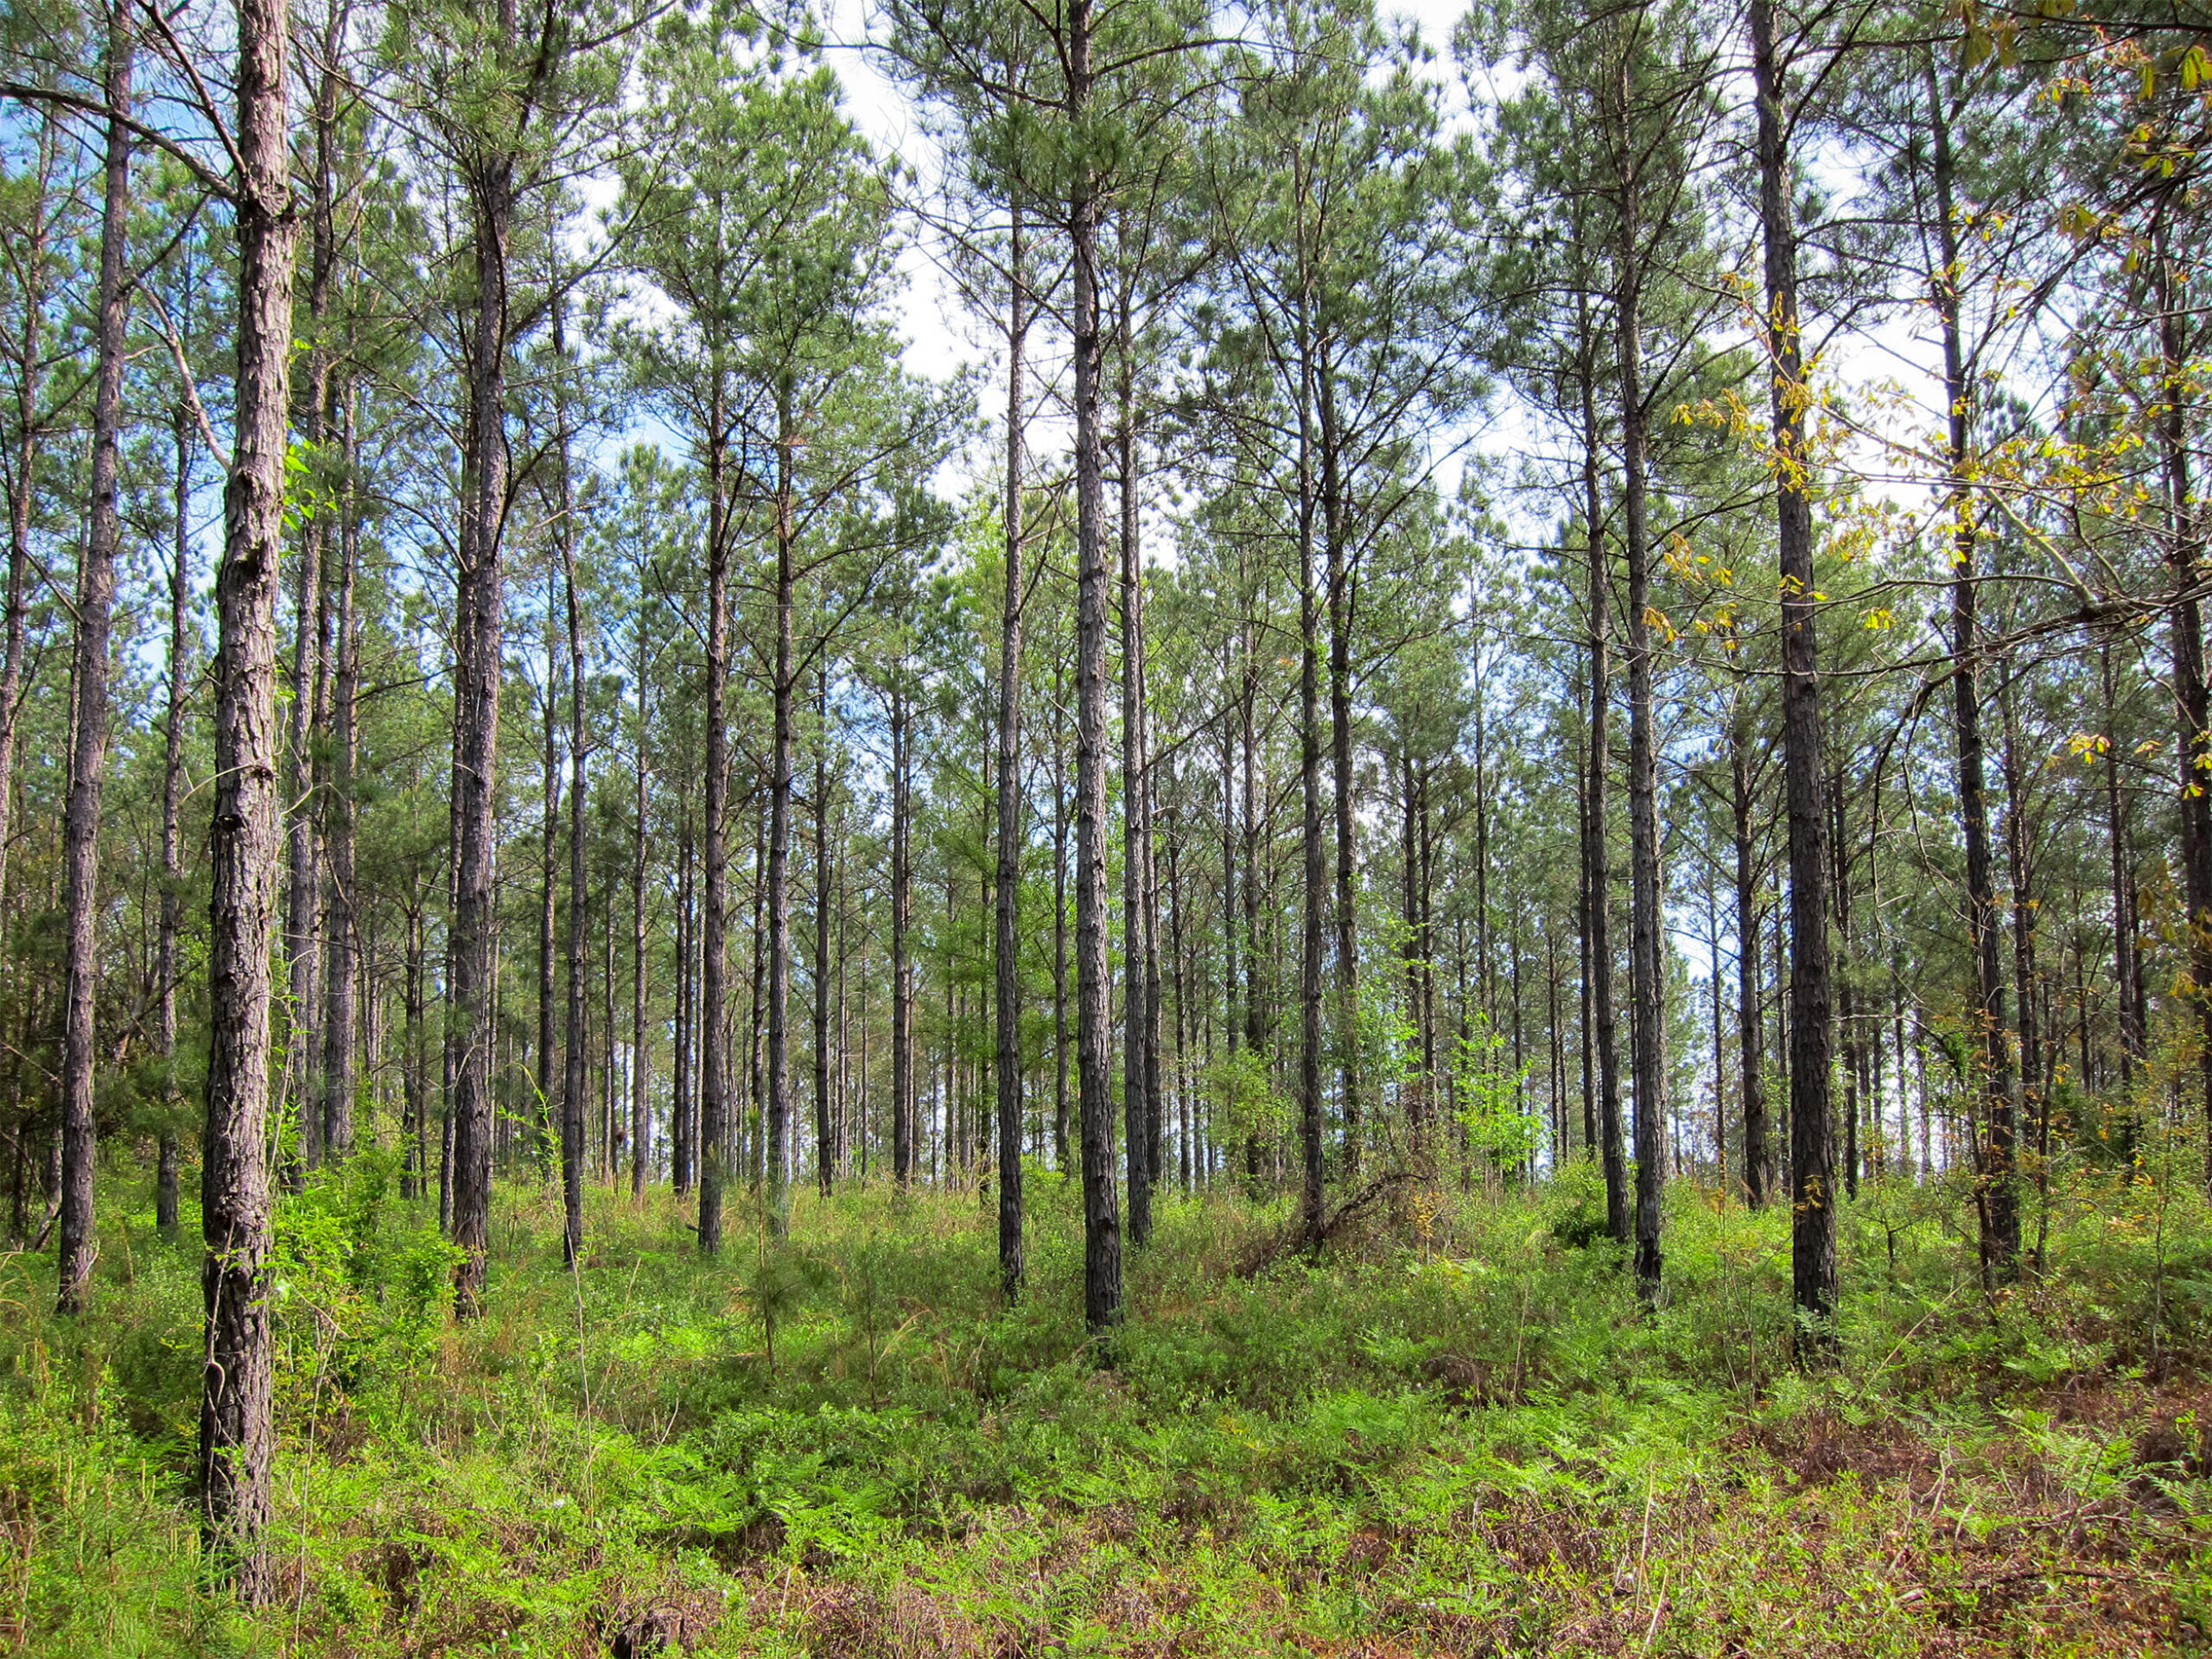 View from inside timber tract with forest of young pine trees